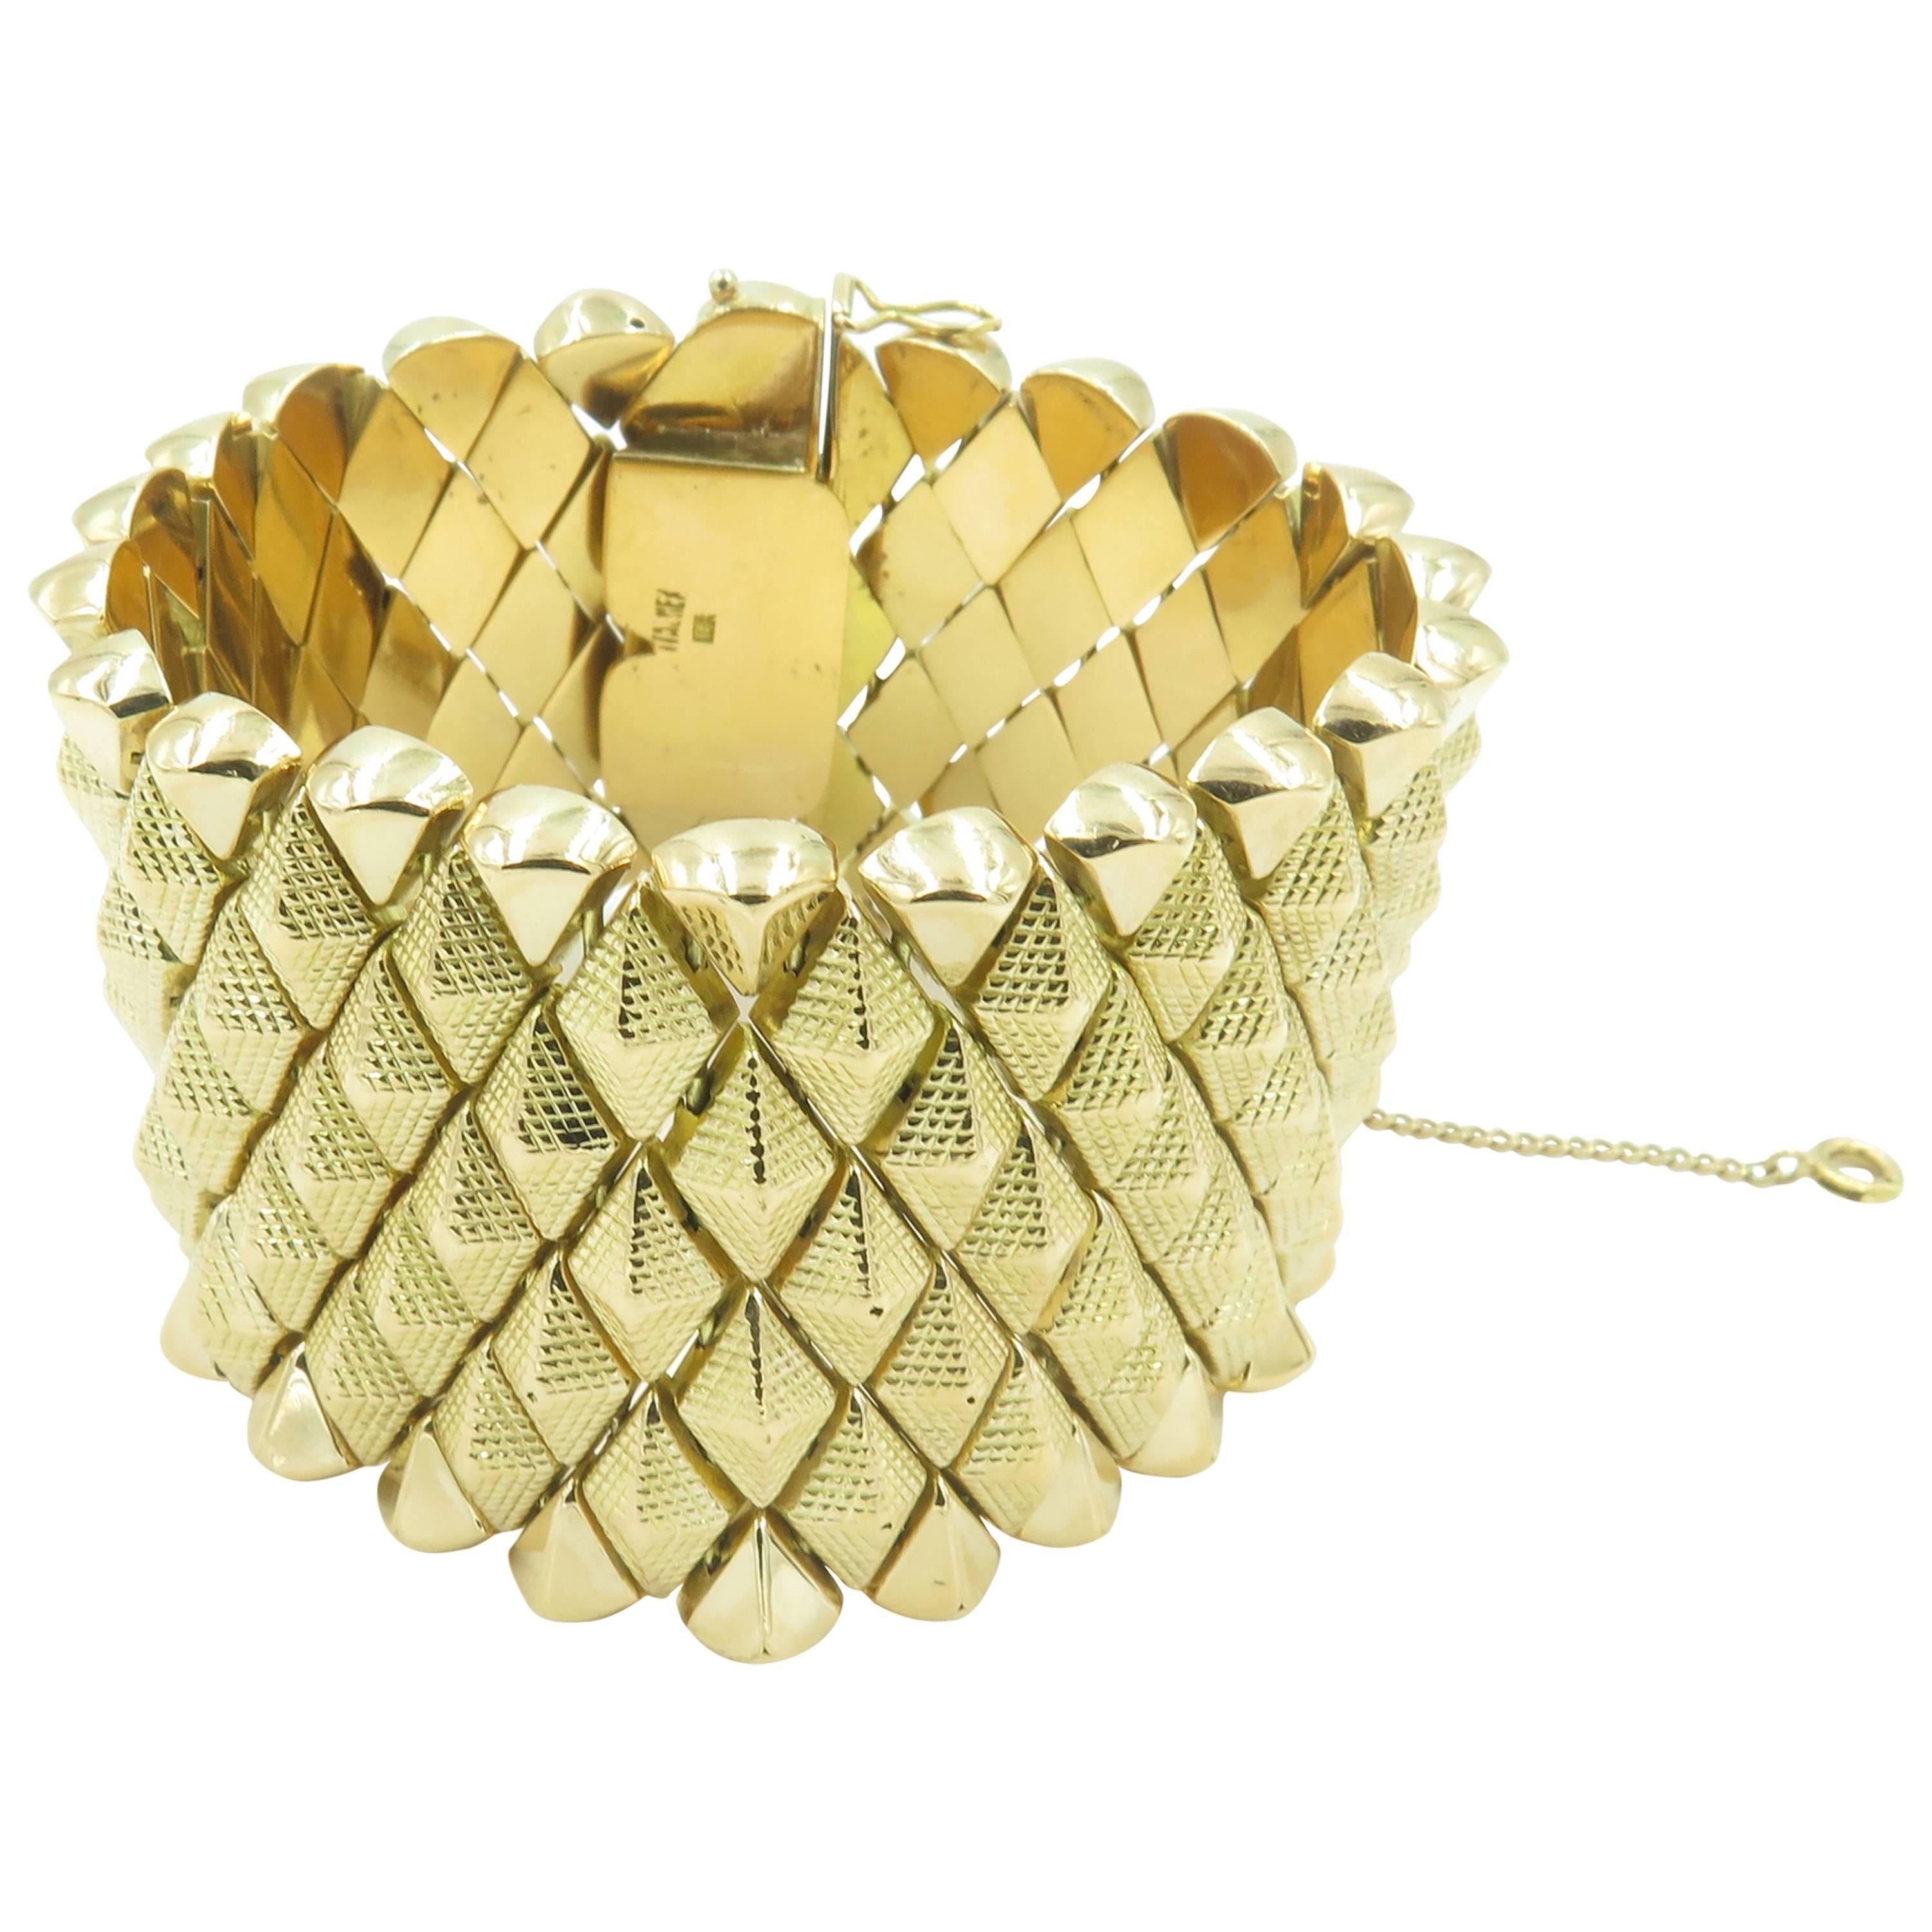 Chic Pyramid Shaped Textured Gold Bracelet